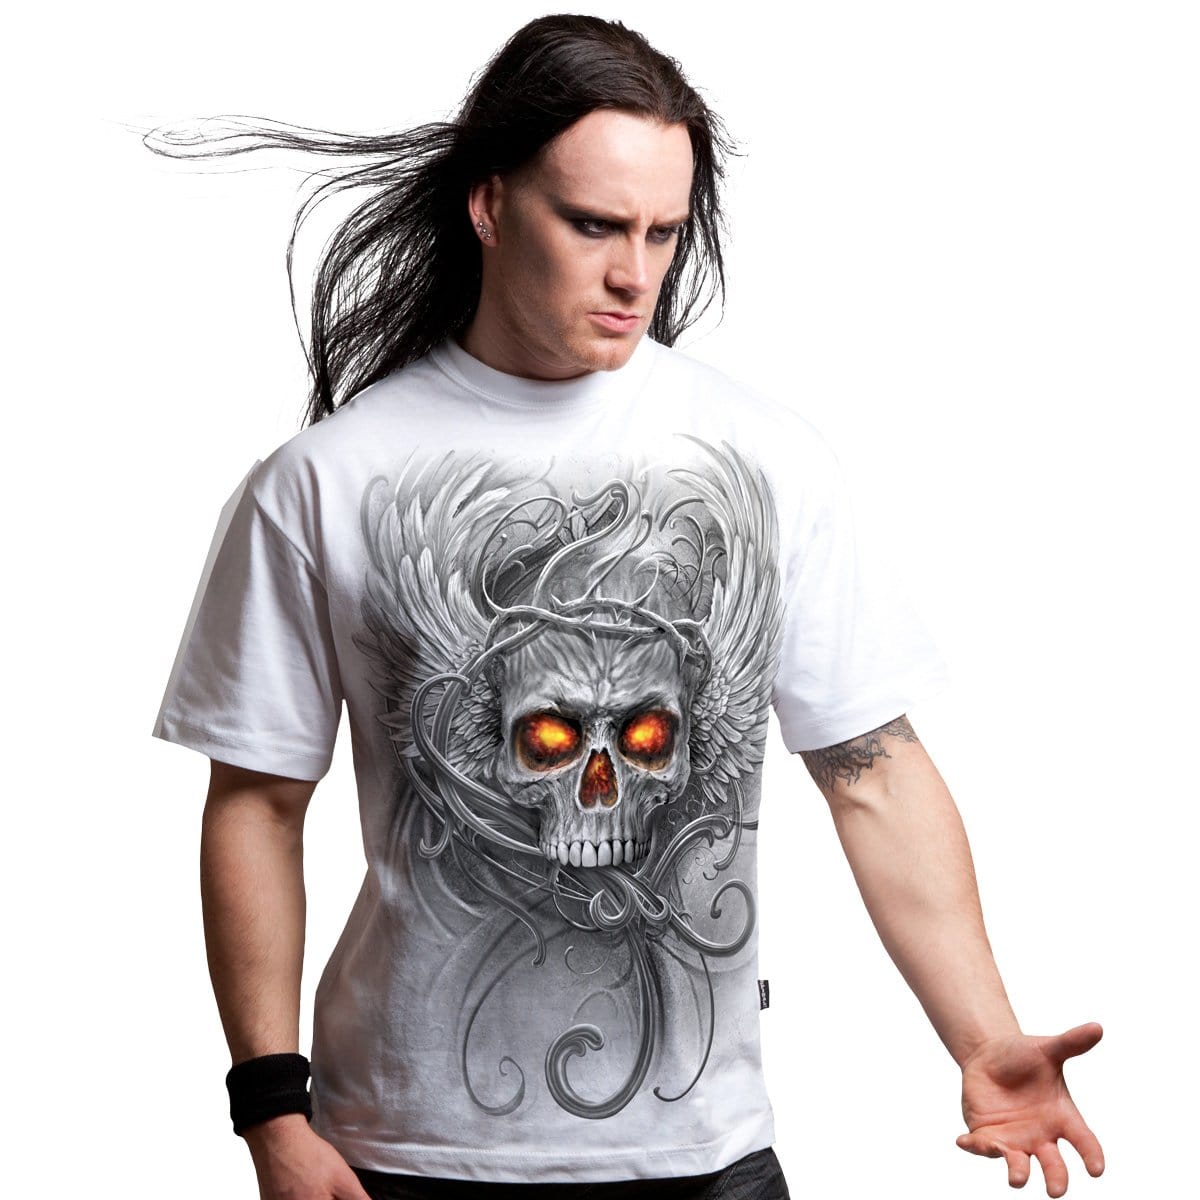 ROOTS OF HELL - T-Shirt White - Spiral USA